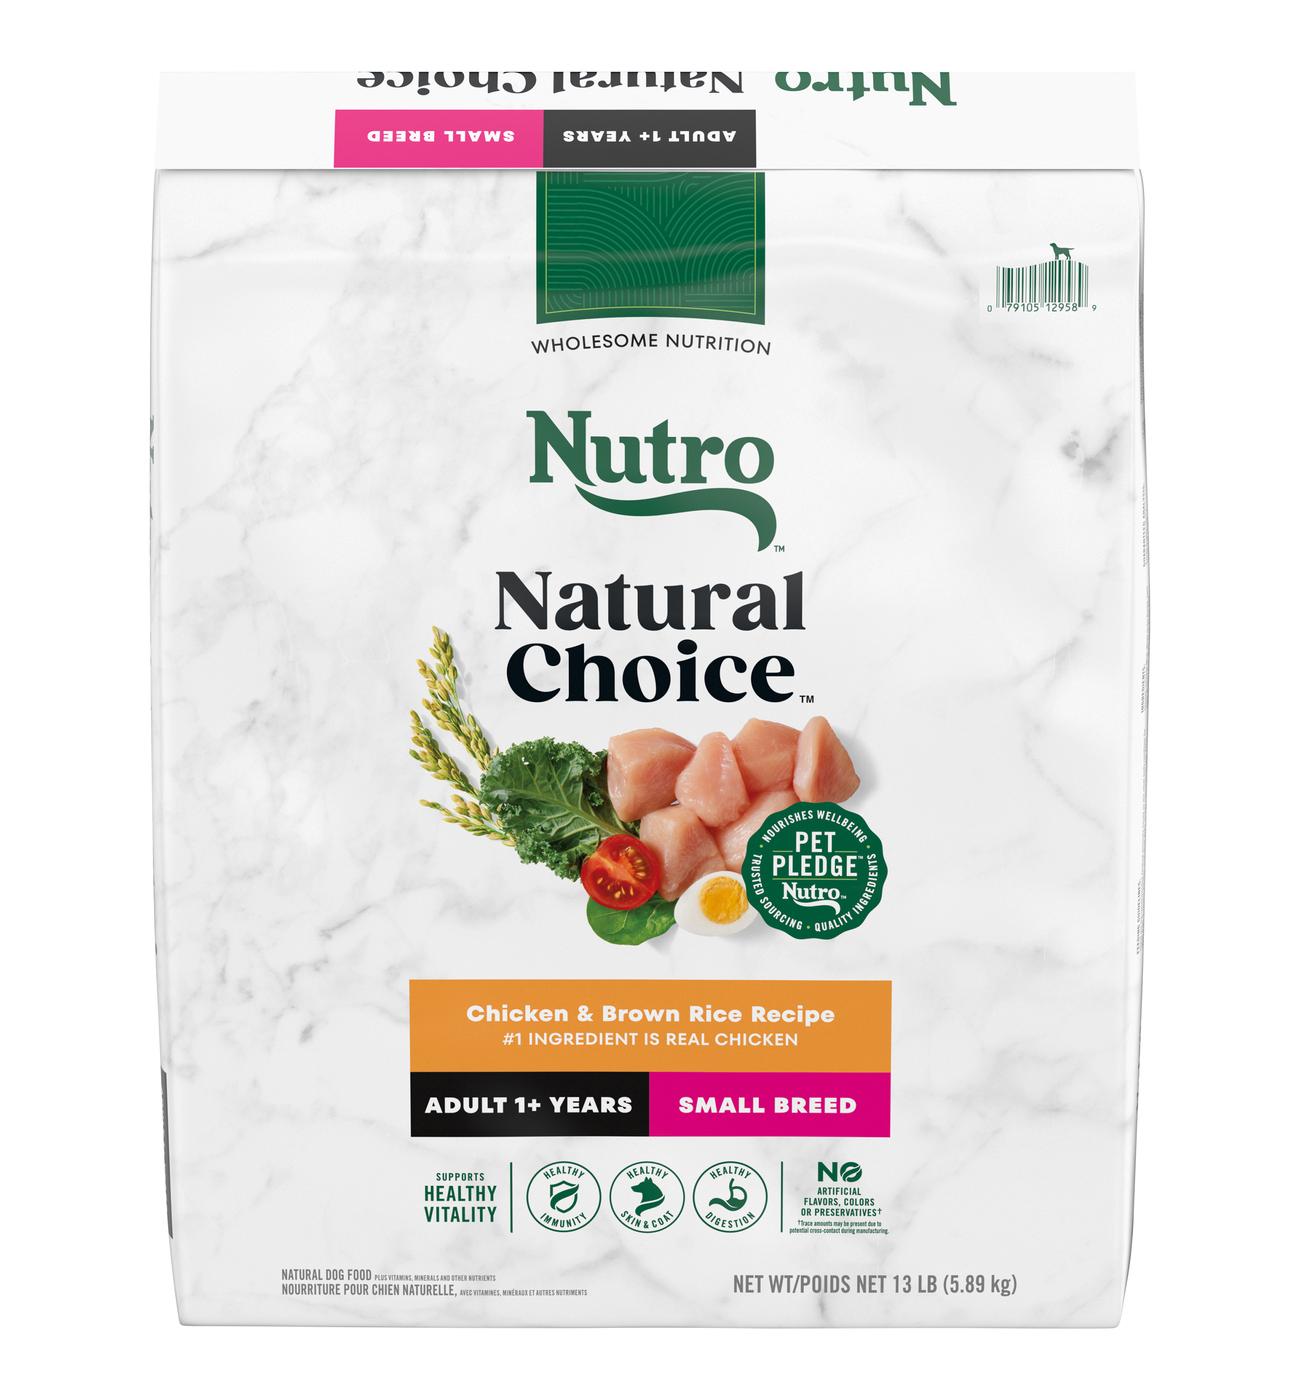 Nutro Natural Choice Adult Small Breed Chicken & Rice Dry Dog Food; image 1 of 5